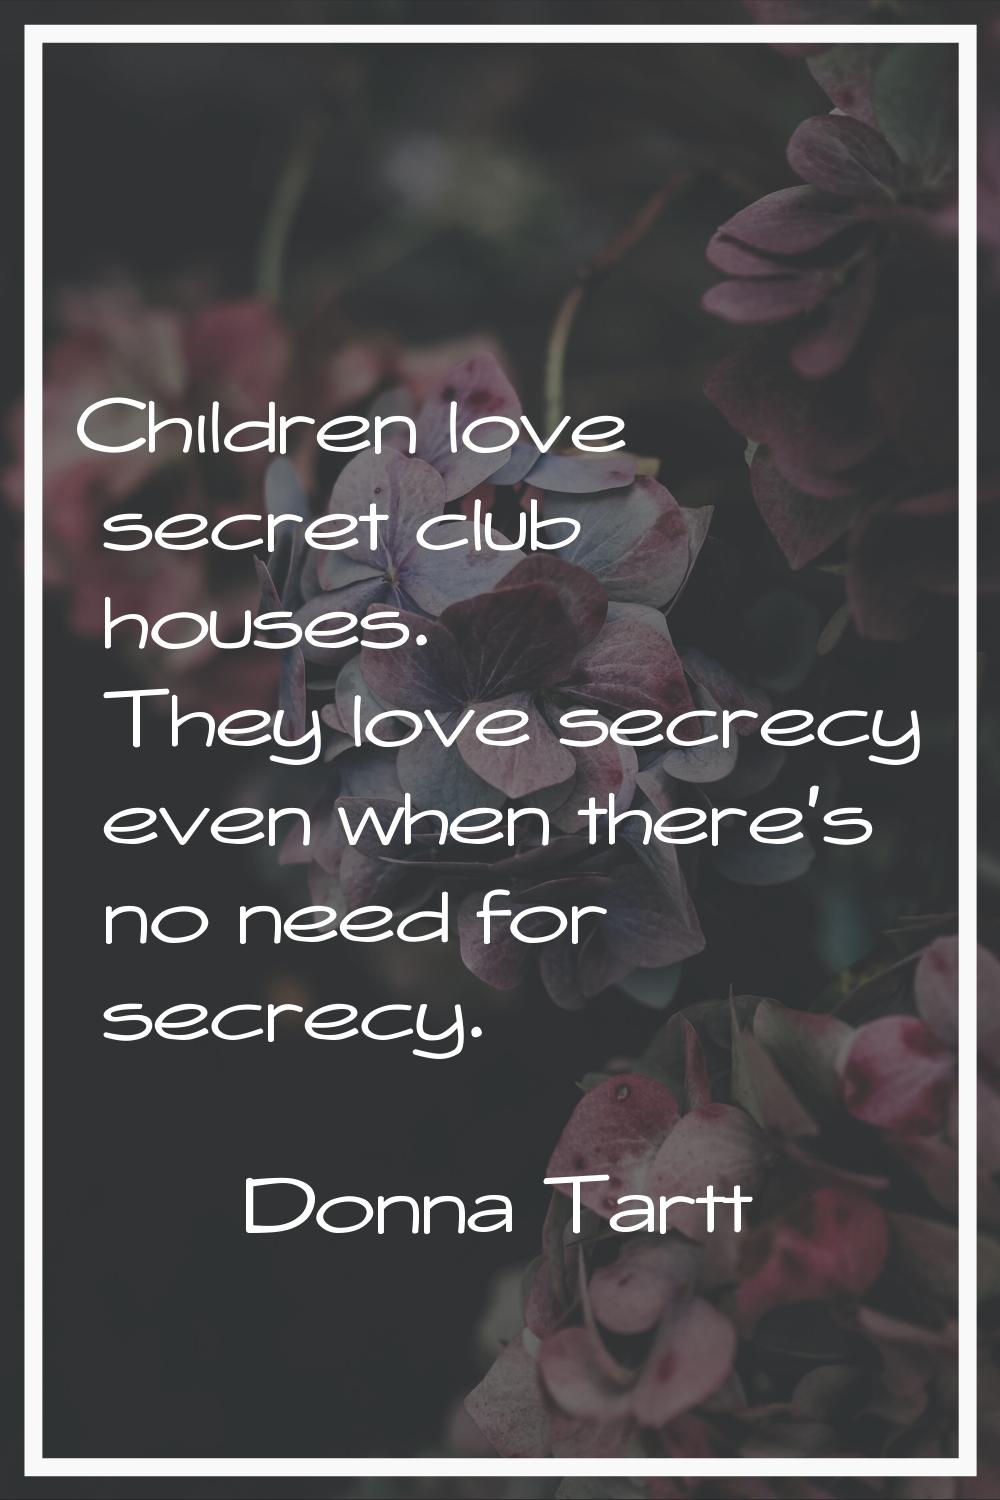 Children love secret club houses. They love secrecy even when there's no need for secrecy.